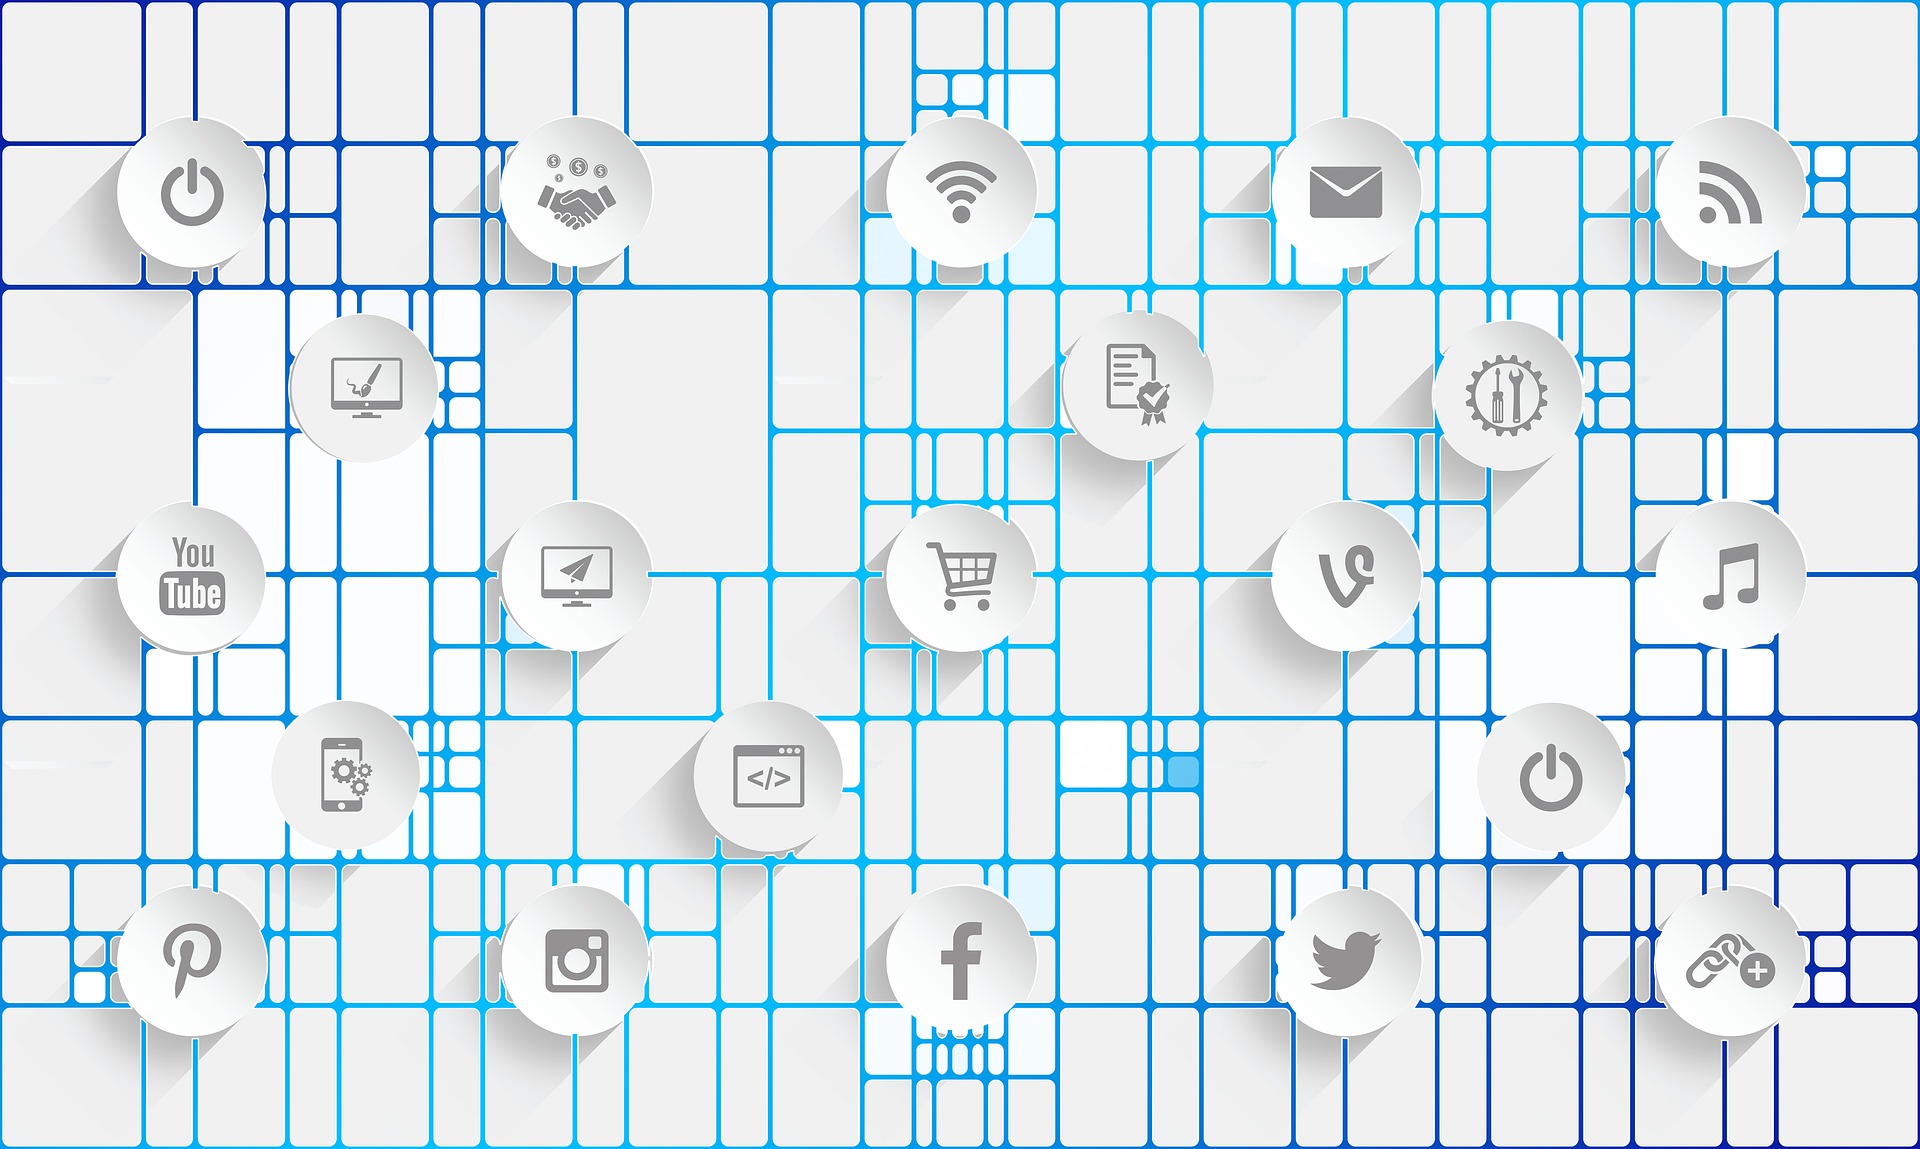 Image includes a rectangular box with social media icons overlaying a networked grid.